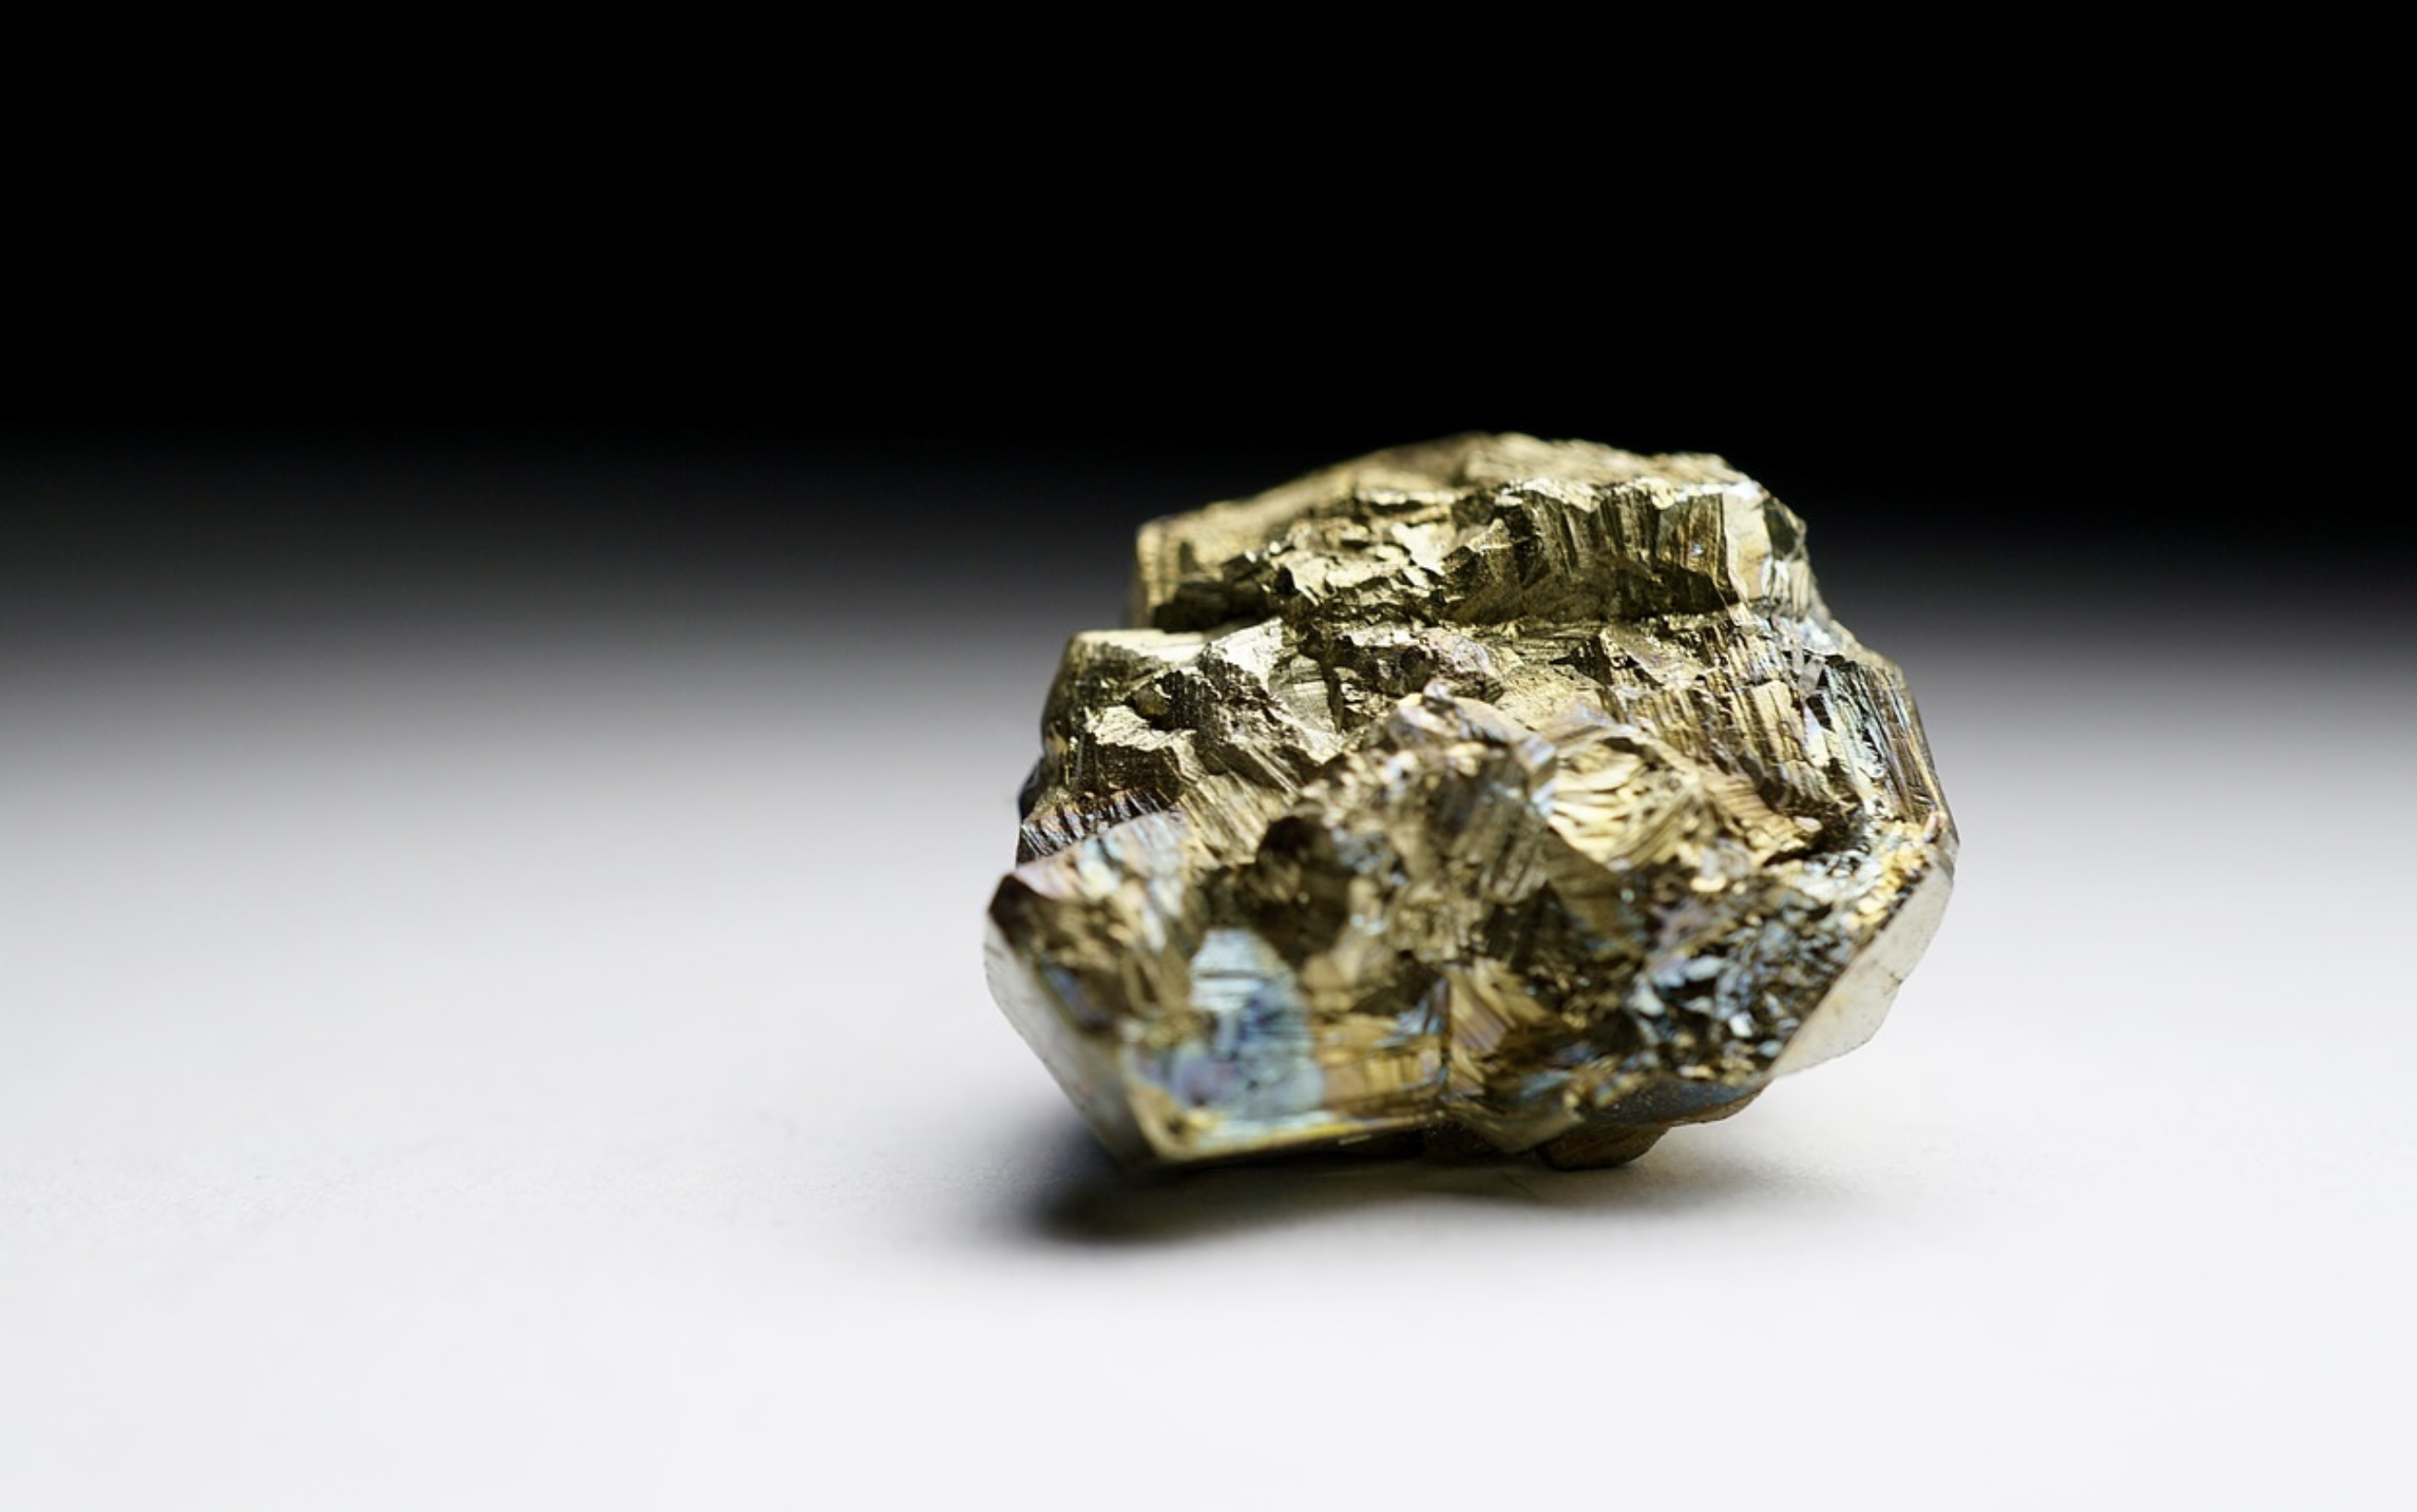 Picture of pyrite. Can you discern fools gold from real gold?